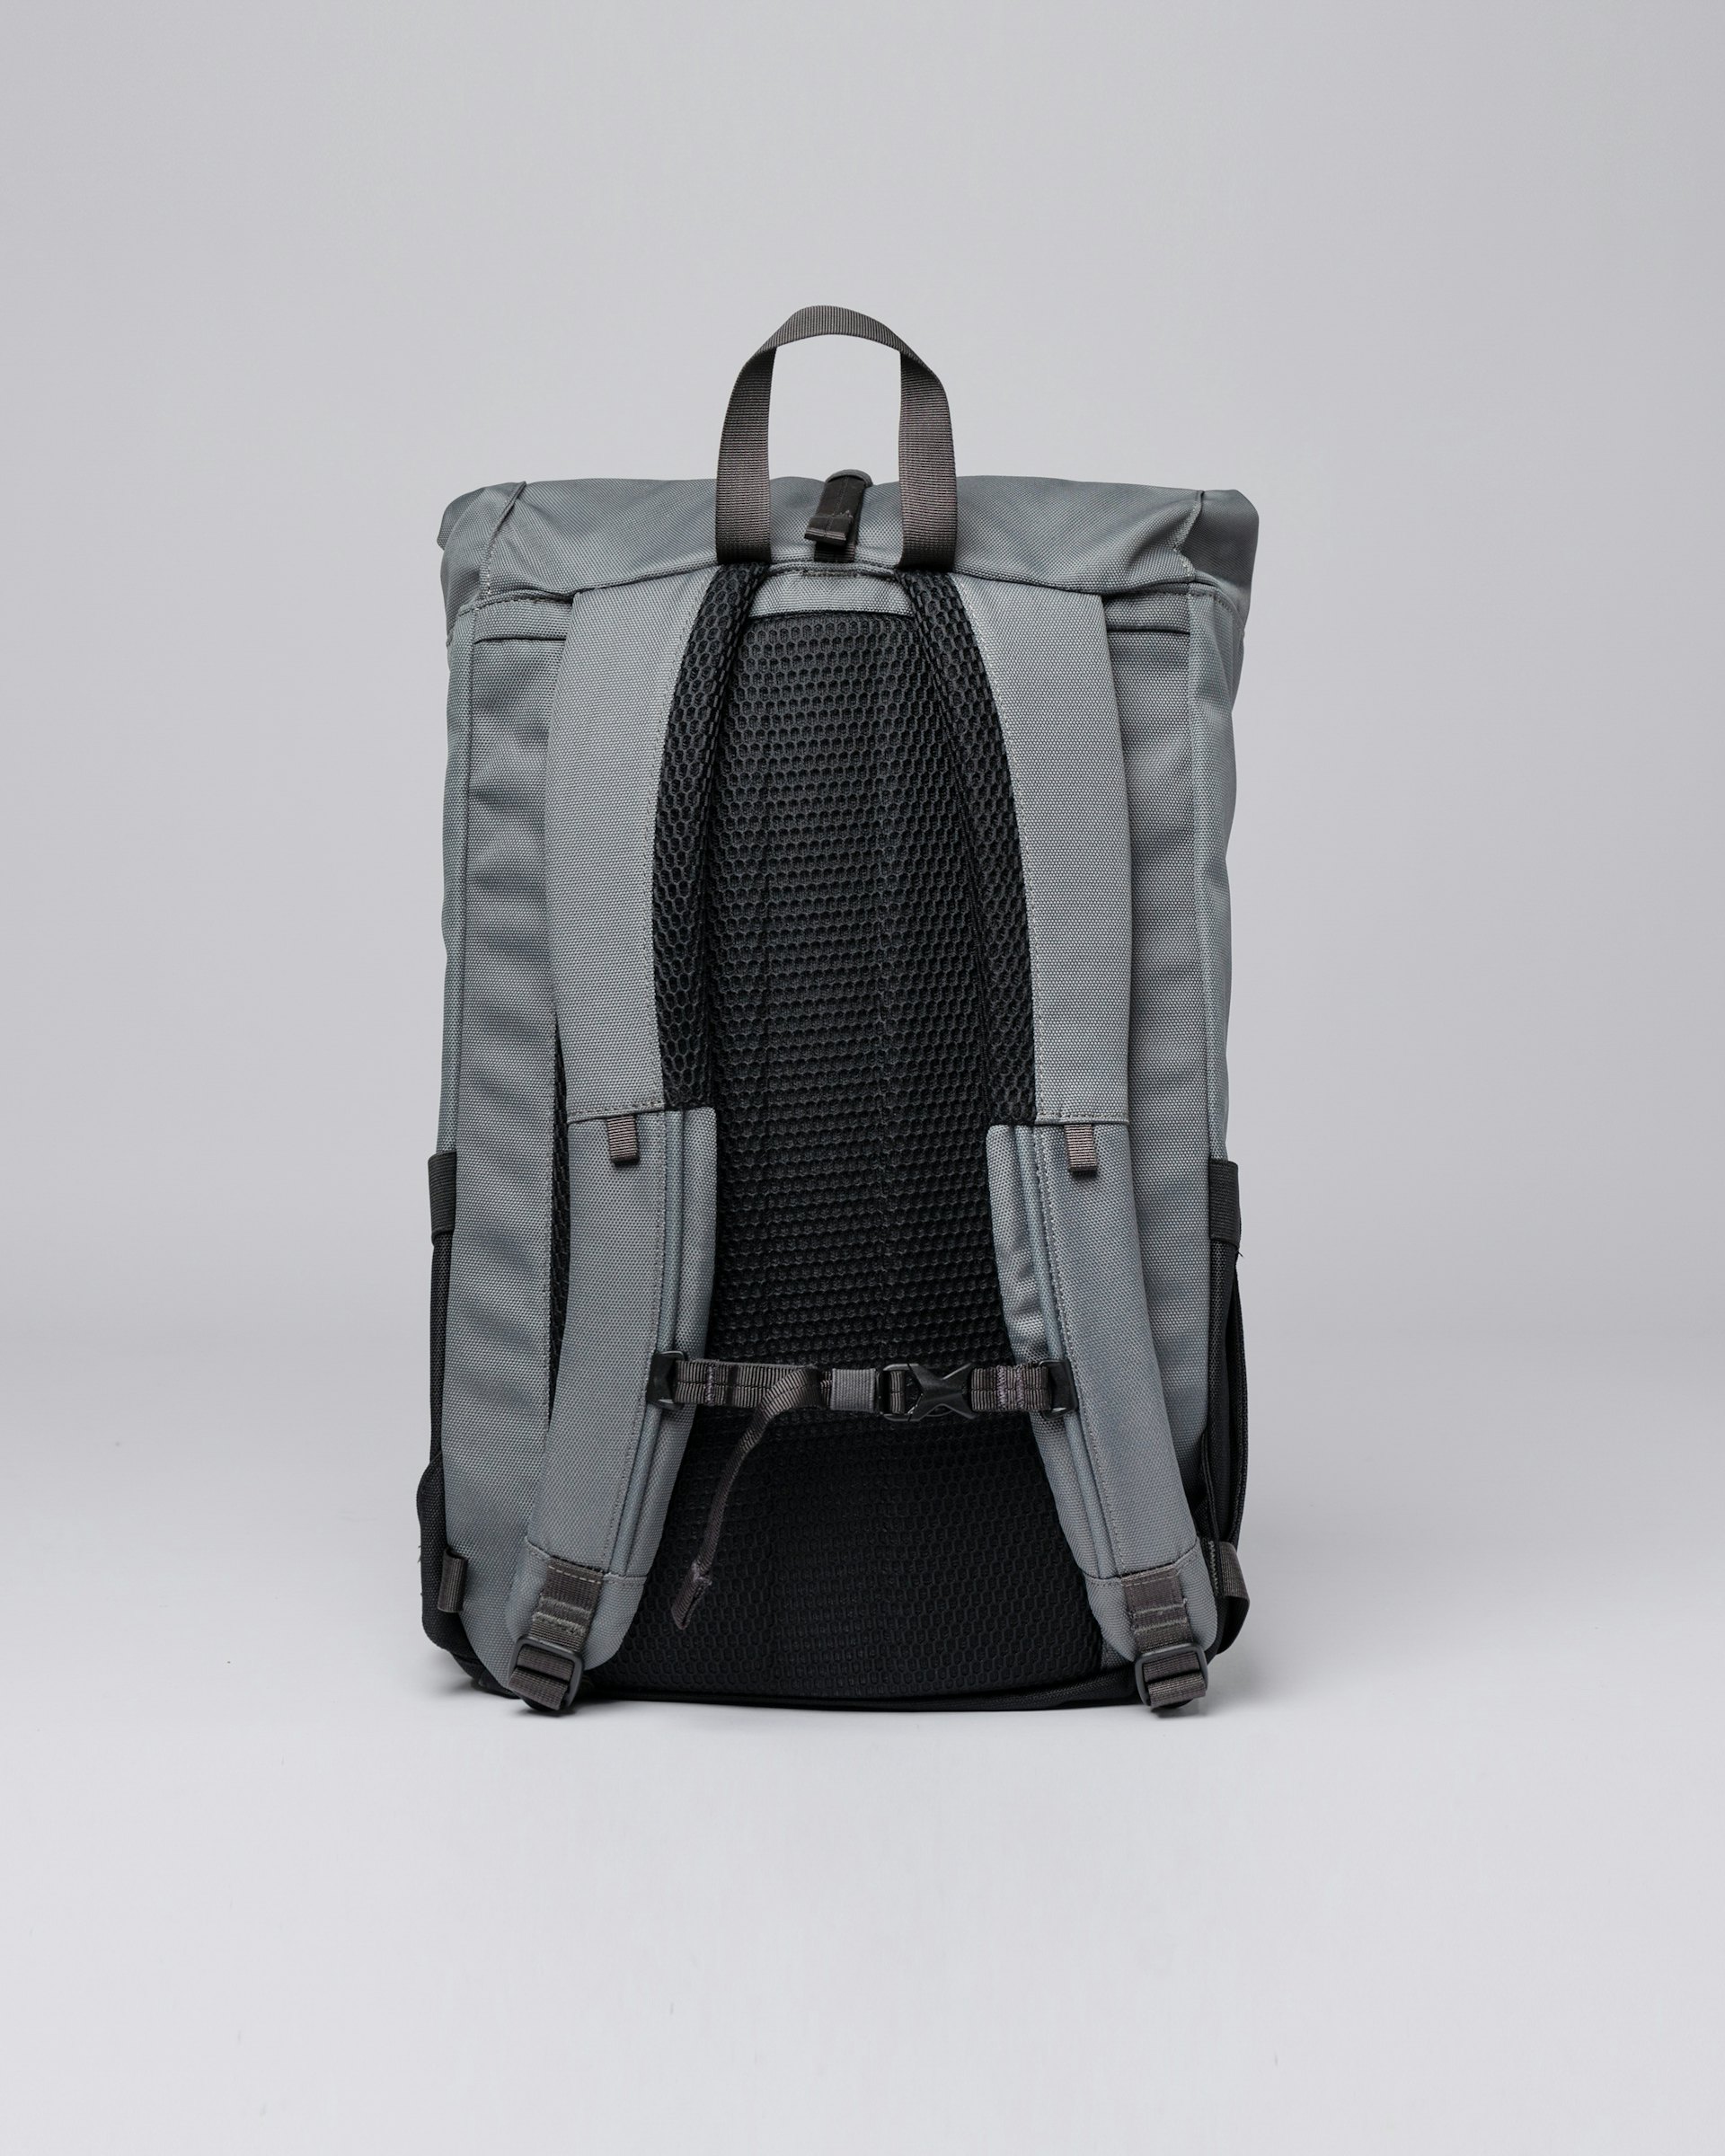 Arvid belongs to the category Backpacks and is in color night grey & black (3 of 5)